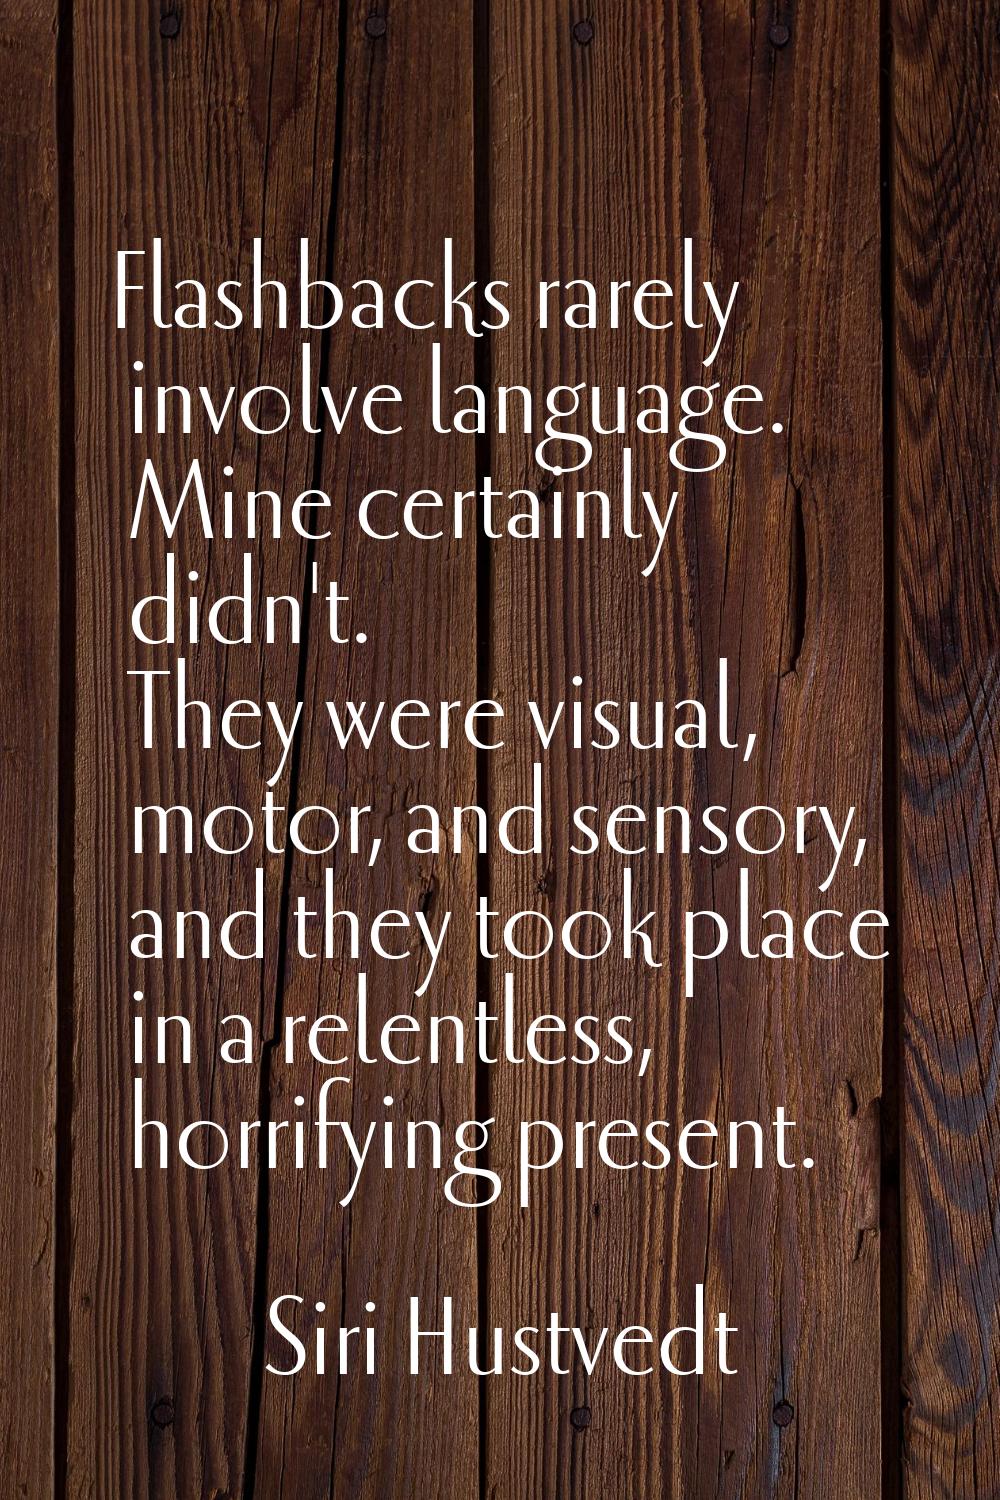 Flashbacks rarely involve language. Mine certainly didn't. They were visual, motor, and sensory, an